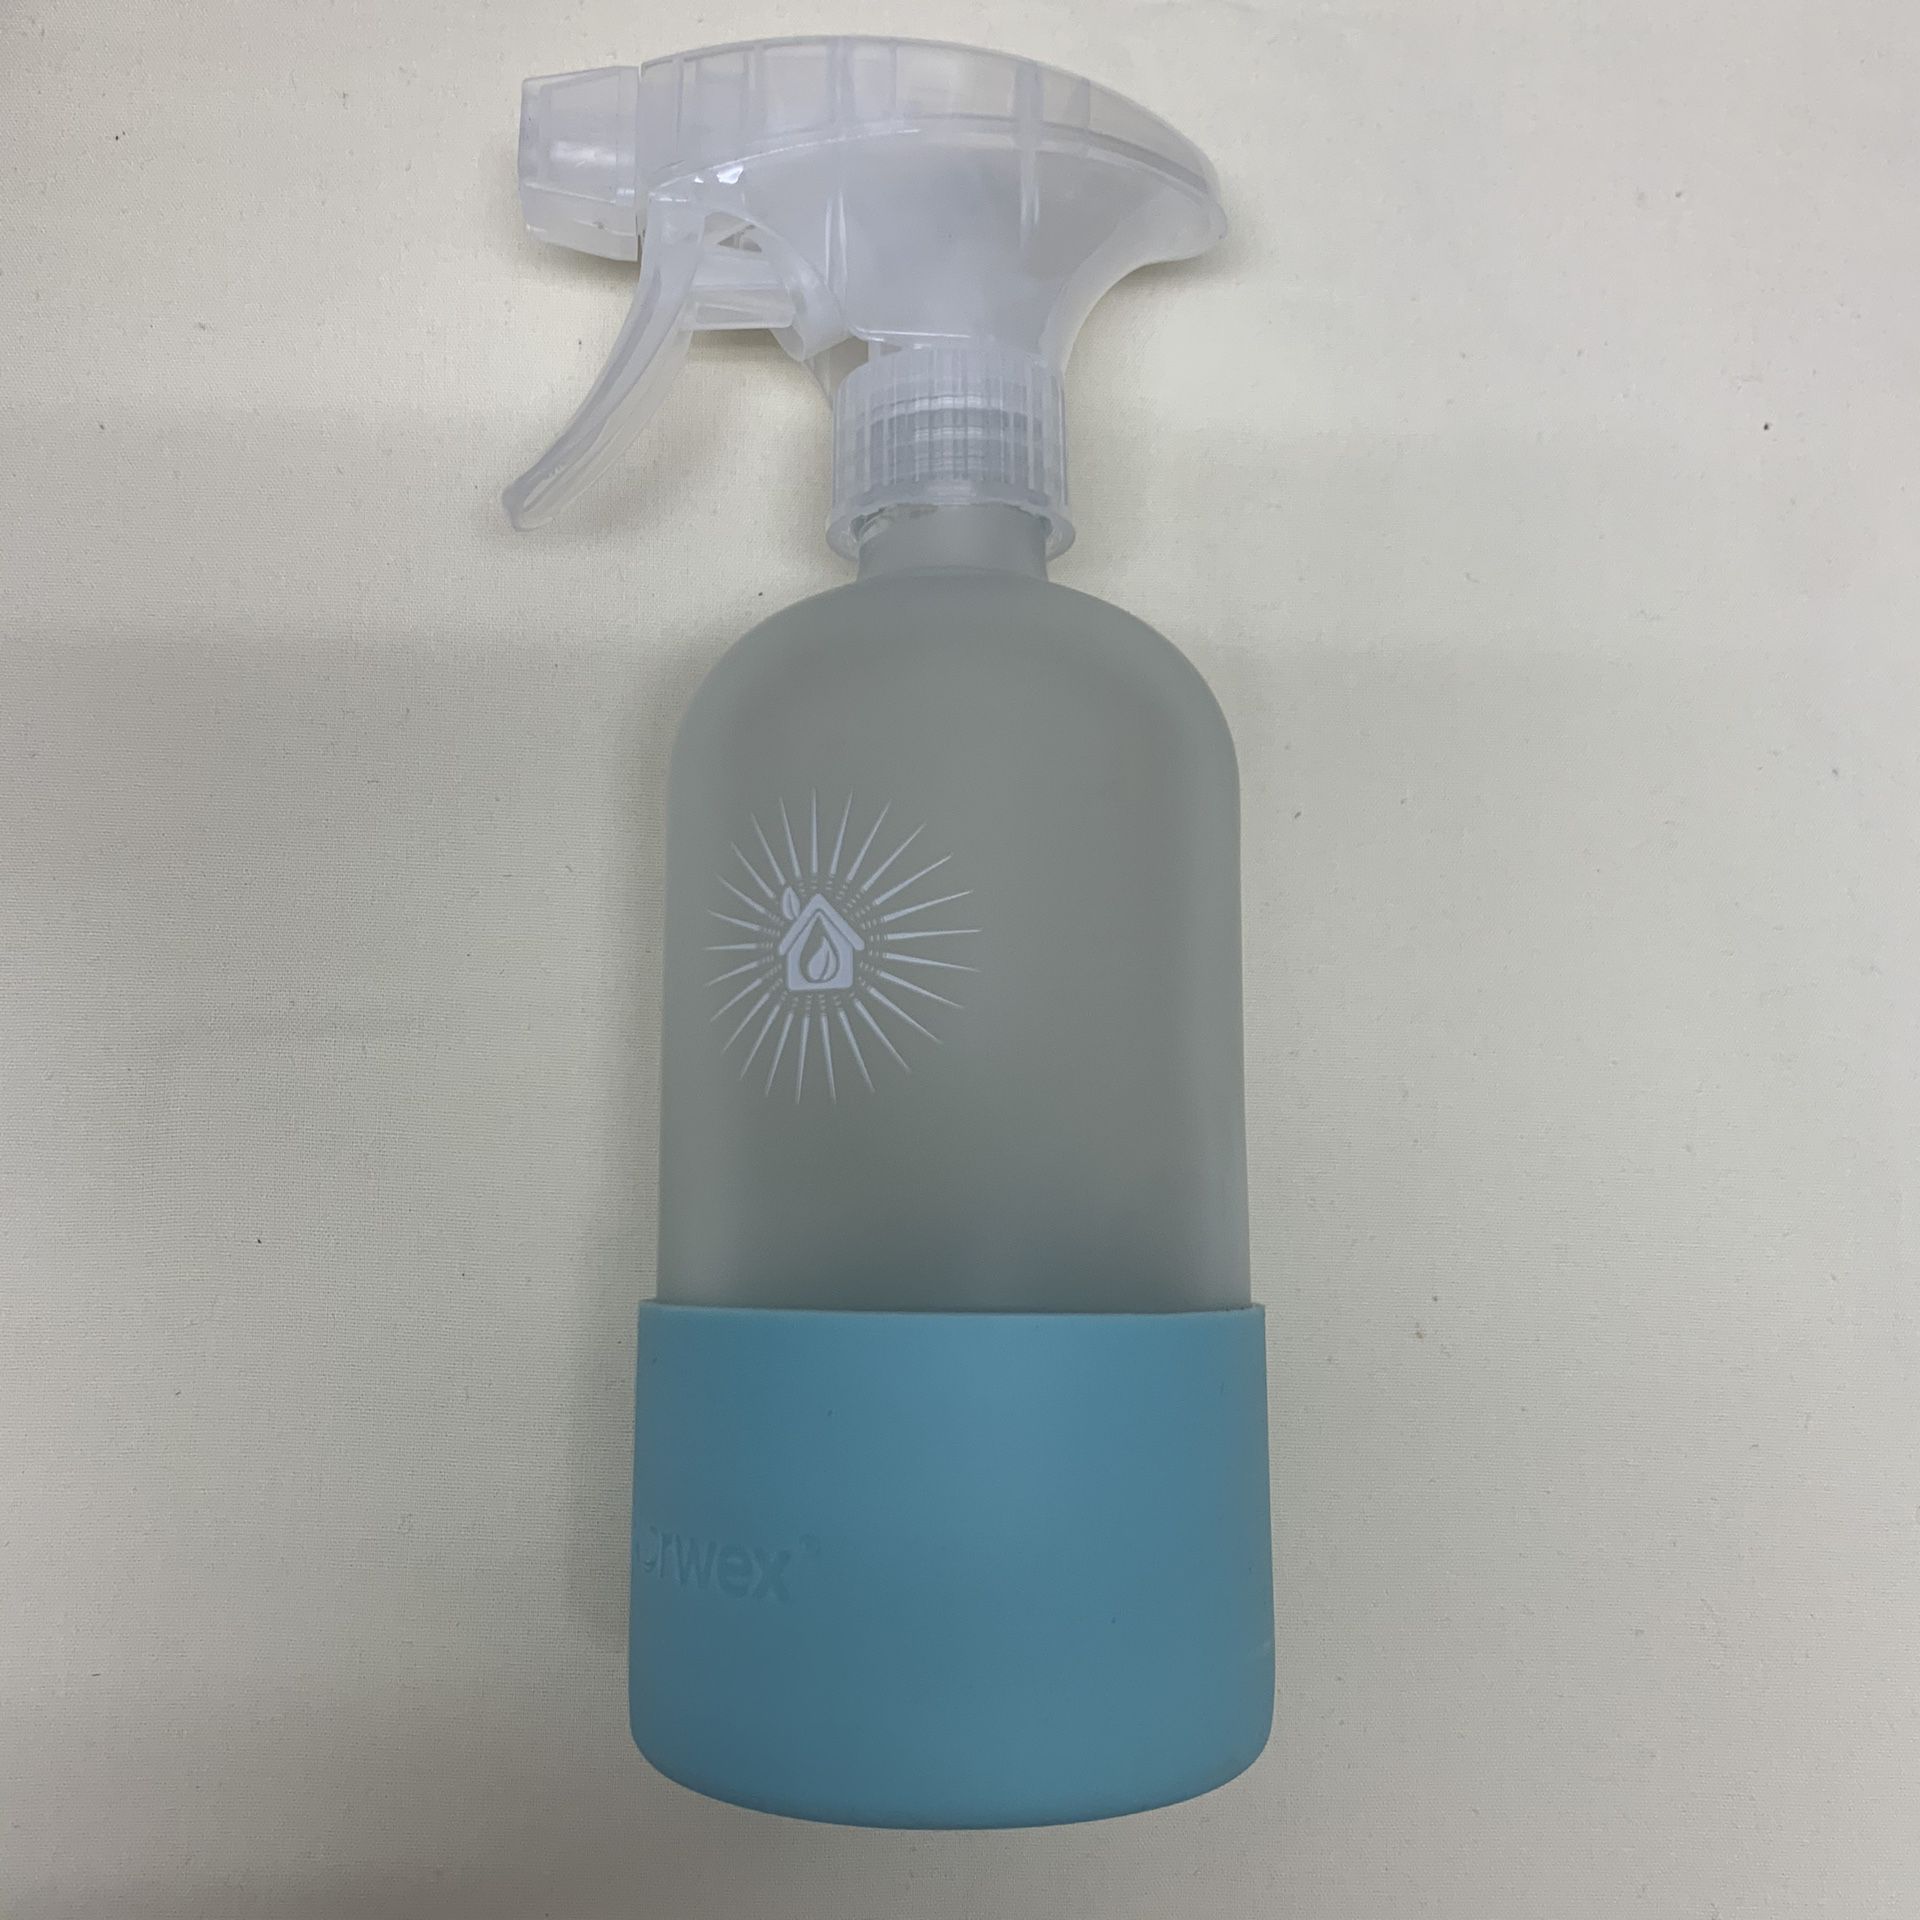 Norwex forever glass bottle with sprayer.